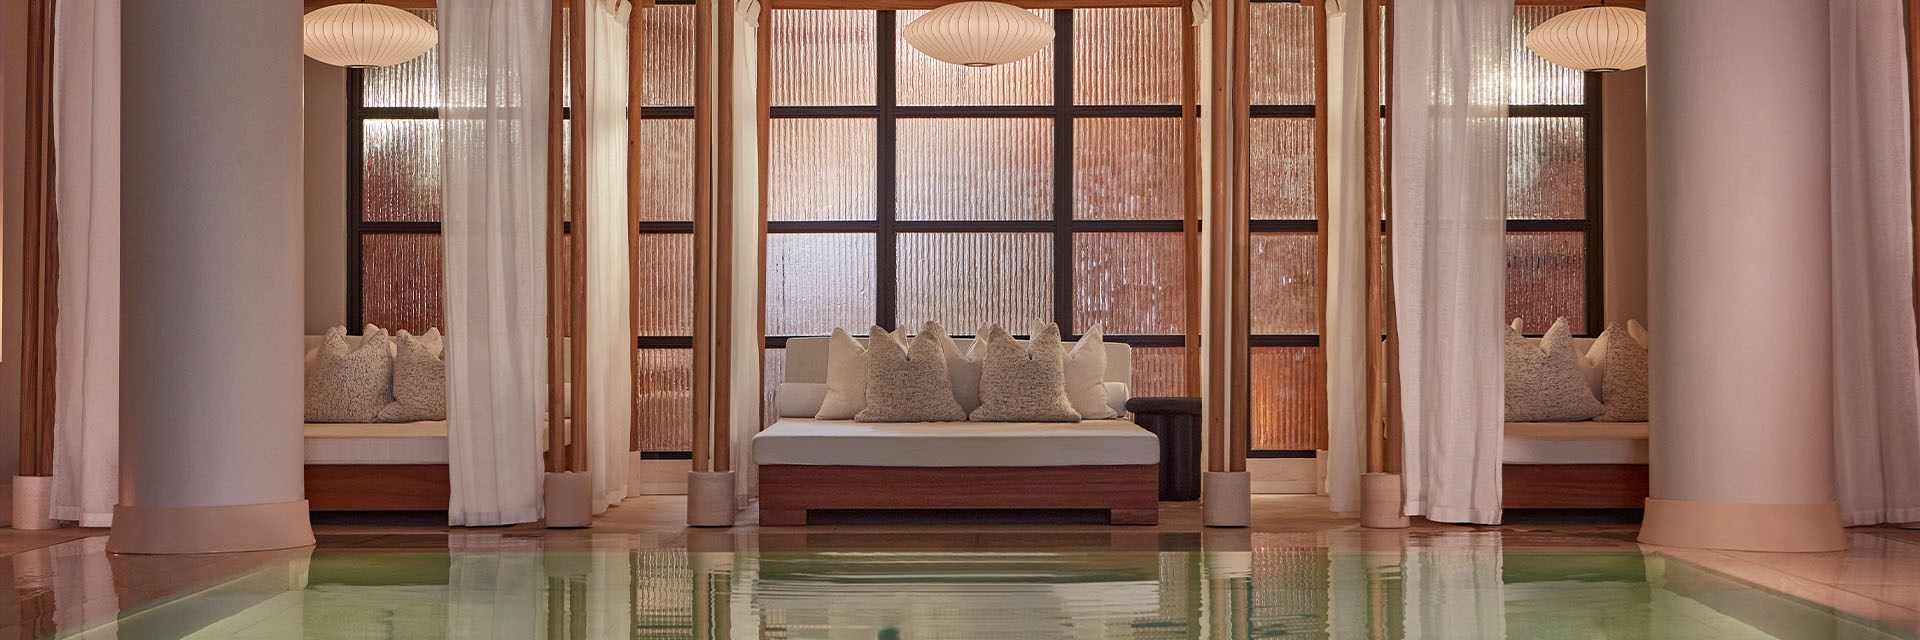 Claridge's spa pool and cabana with cushions -  a calming atmosphere